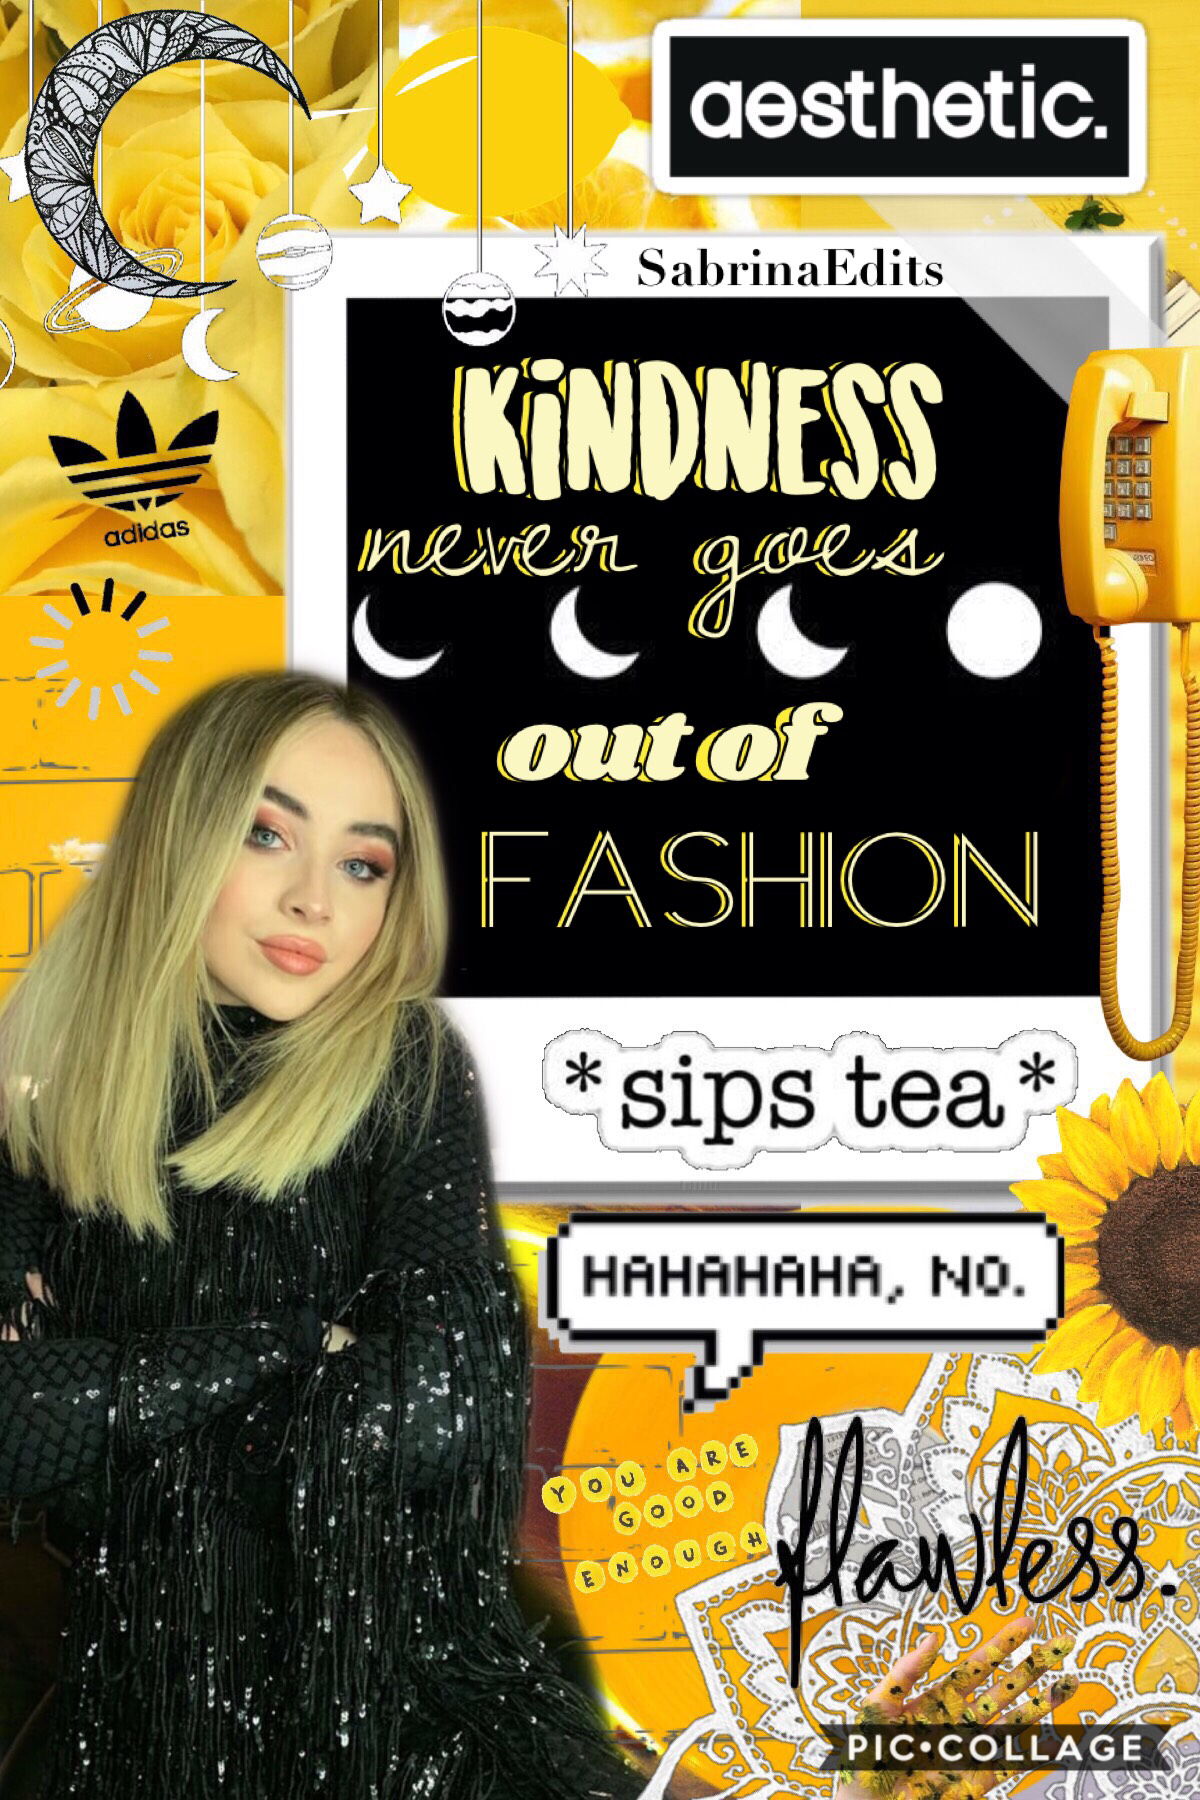 💛TaP💛 
Happy Sunday! hope you guys like this edit (not my favorite but ya know) anyways QOTD: what is your favorite color? (hope i haven’t asked this yet) AOTD: Blue 💙